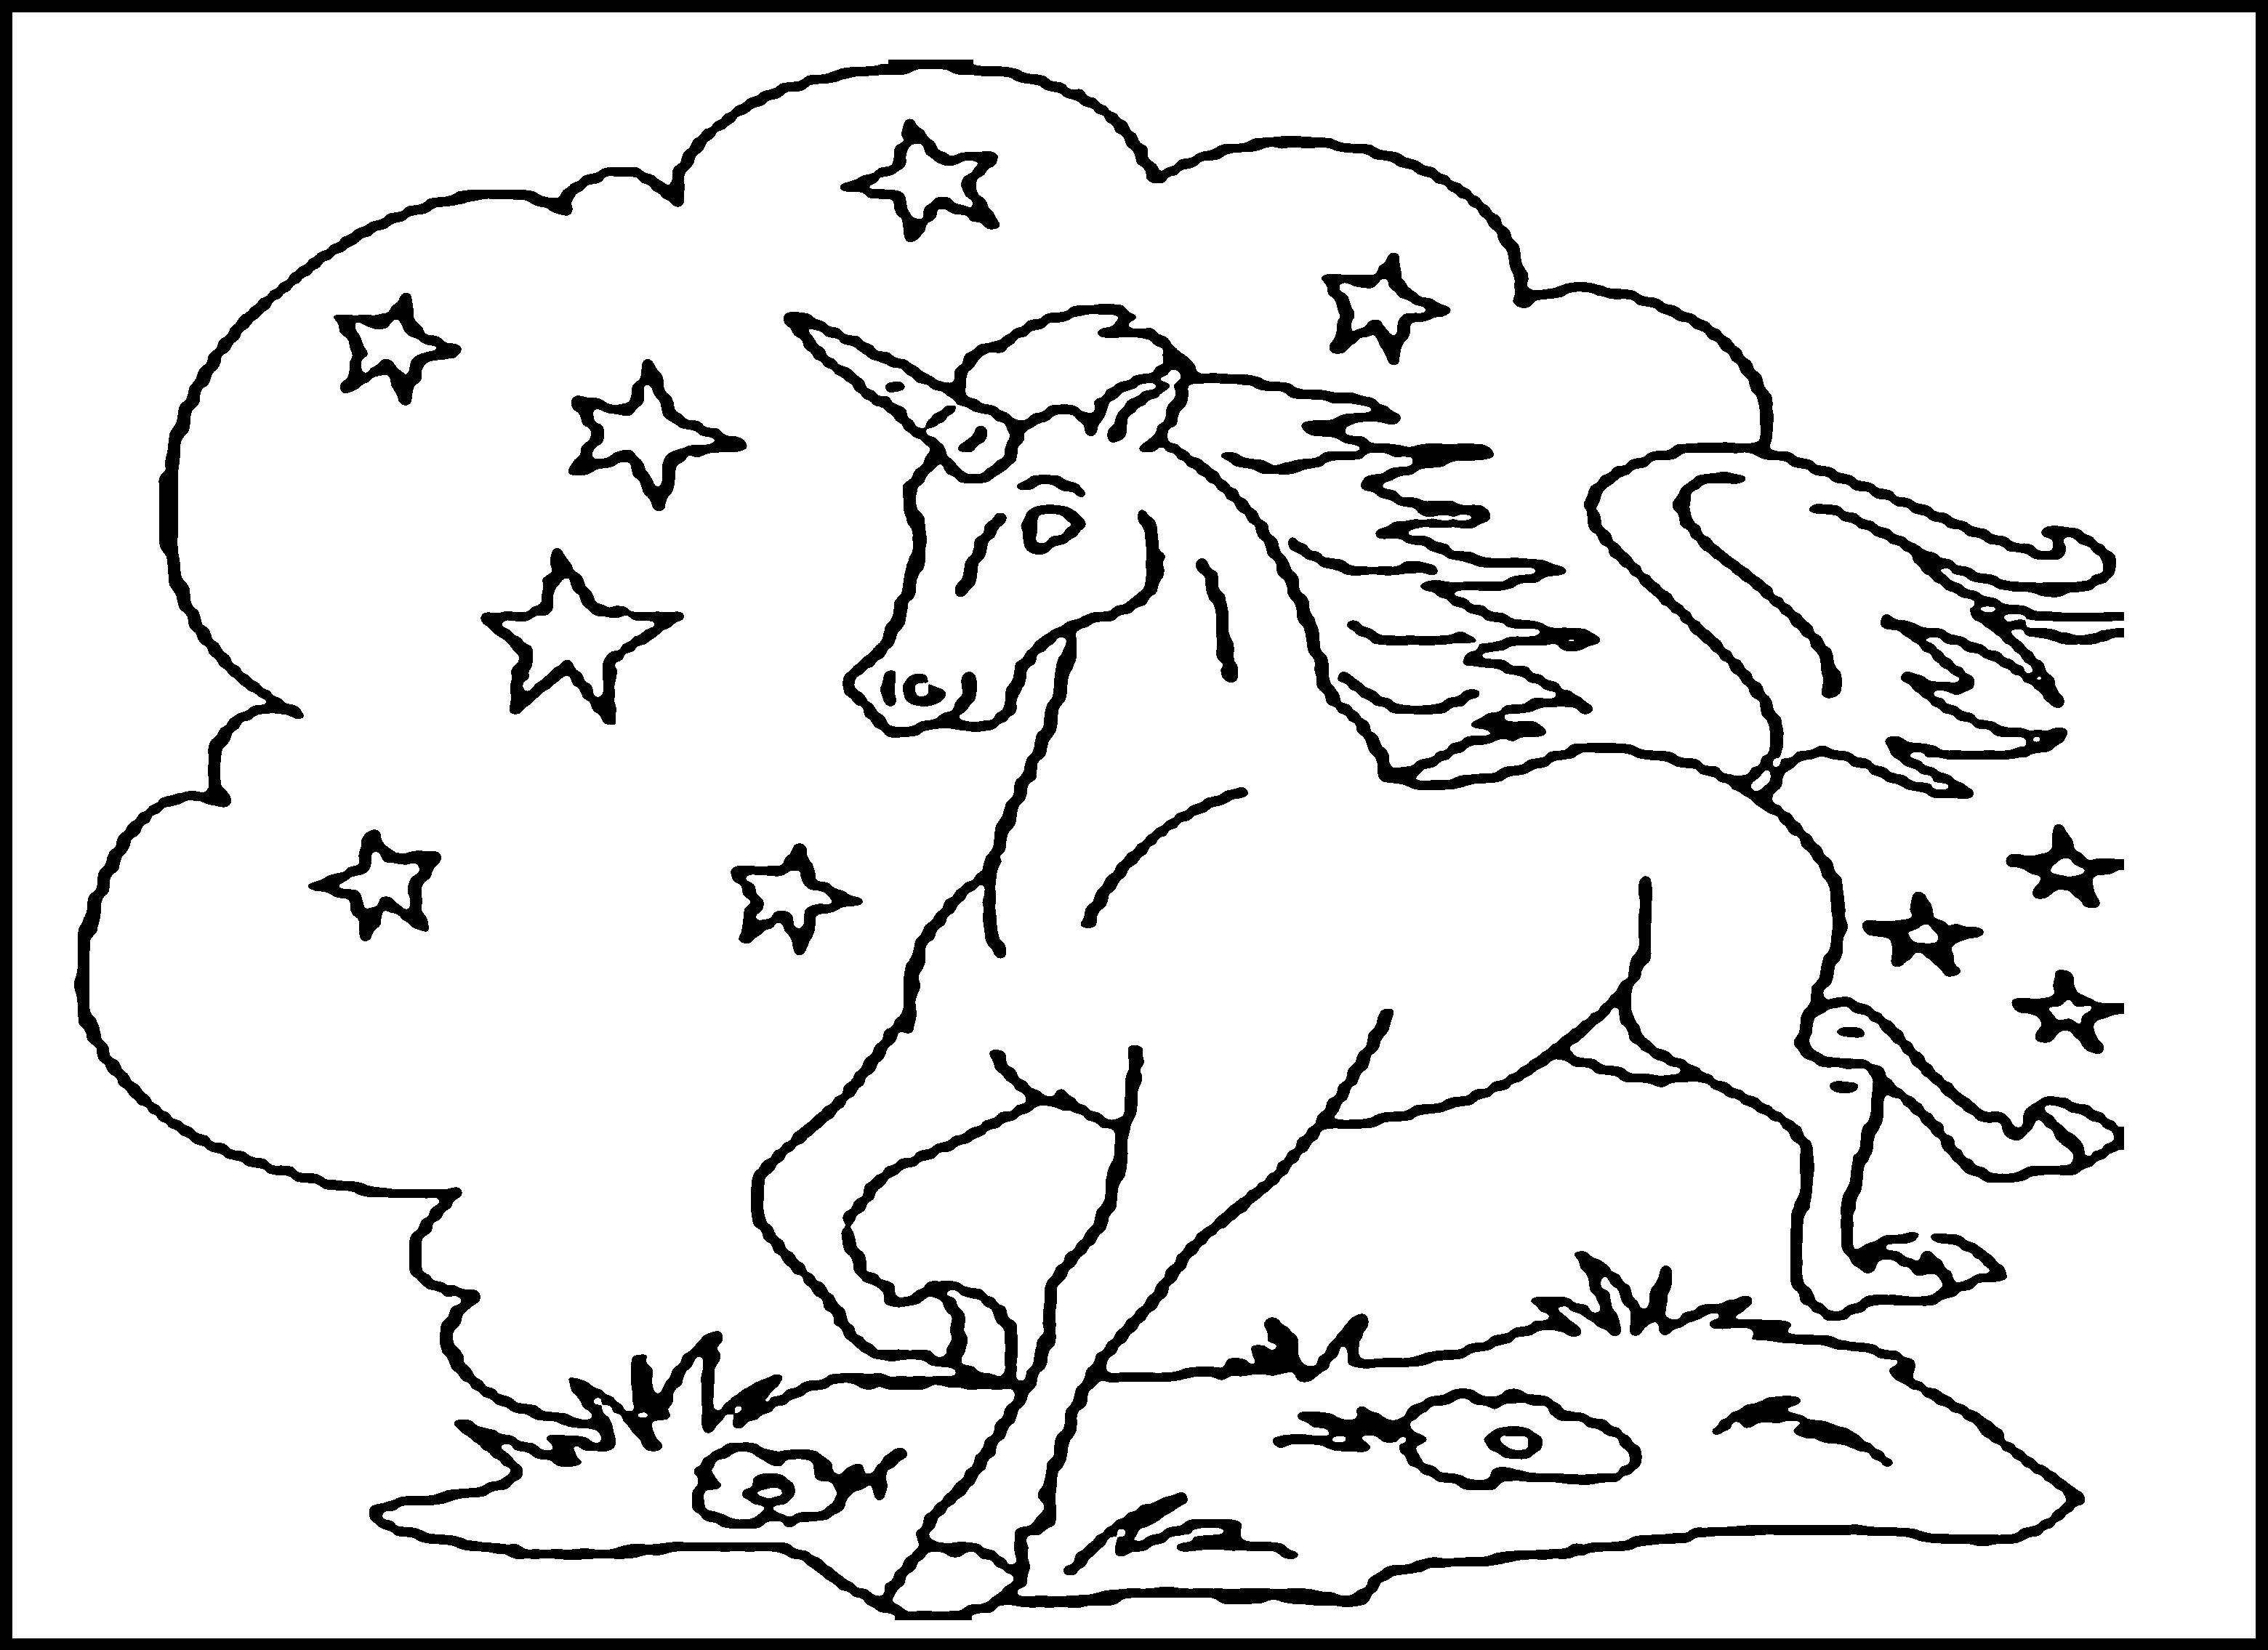 Coloring The winged unicorn and stars. Category coloring. Tags:  unicorn, wings, stars.